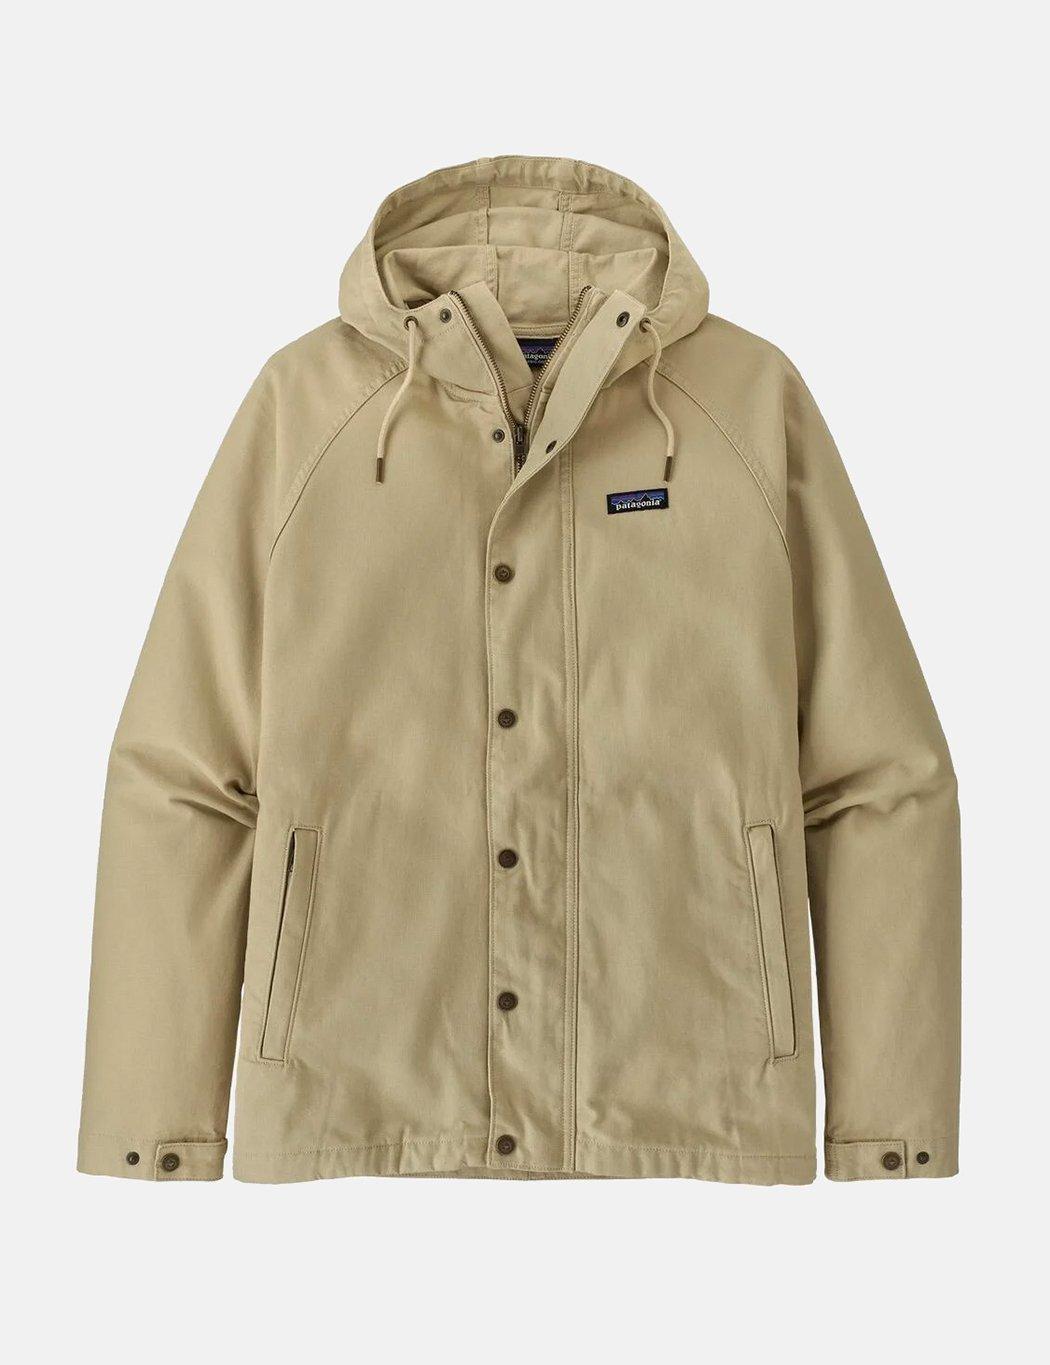 Patagonia Organic Cotton Canvas Jacket in Beige (Natural) for Men - Lyst